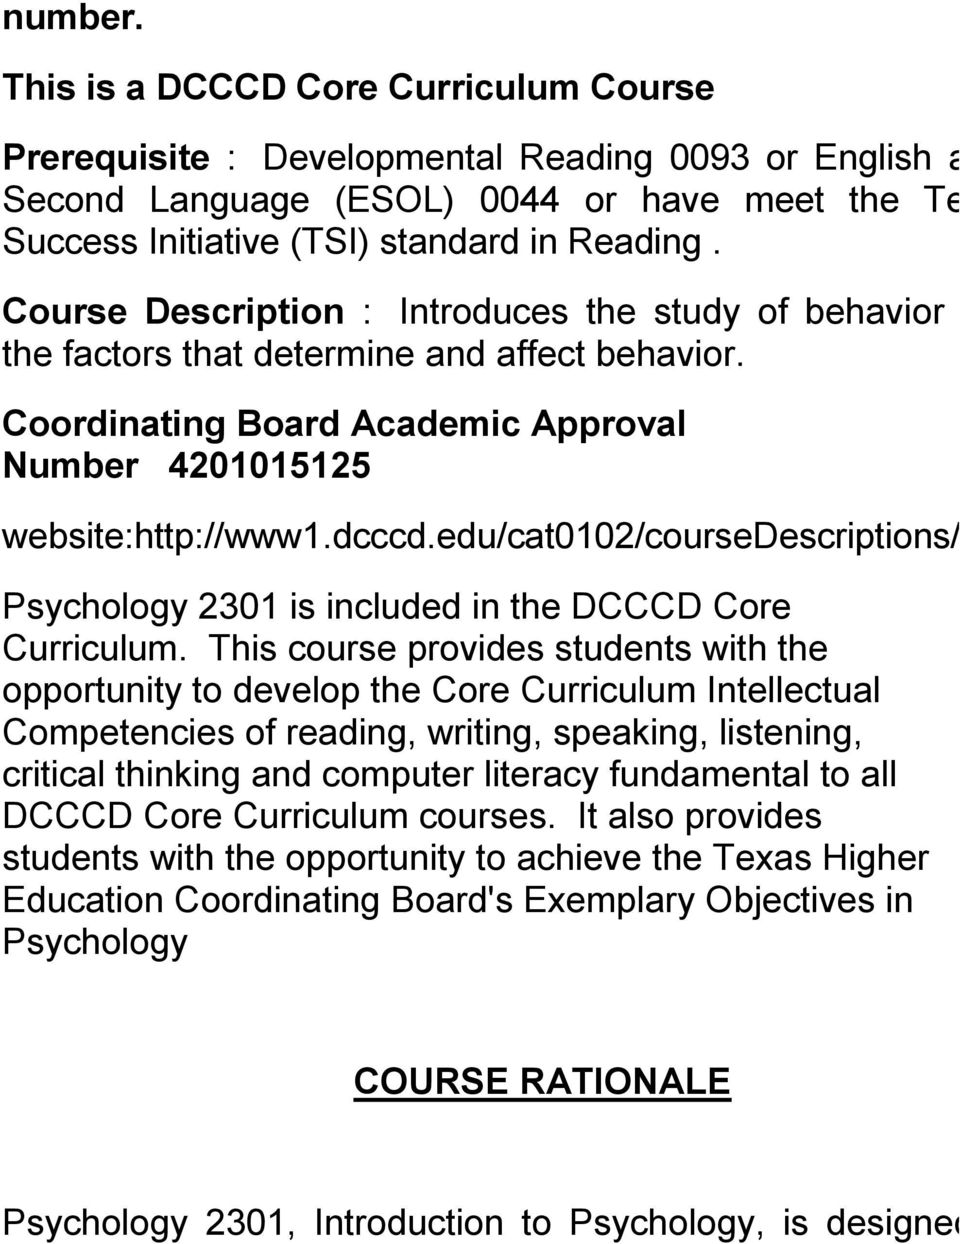 Course Description : Introduces the study of behavior and the factors that determine and affect behavior. Coordinating Board Academic Approval Number 4201015125 website:http://www1.dcccd.